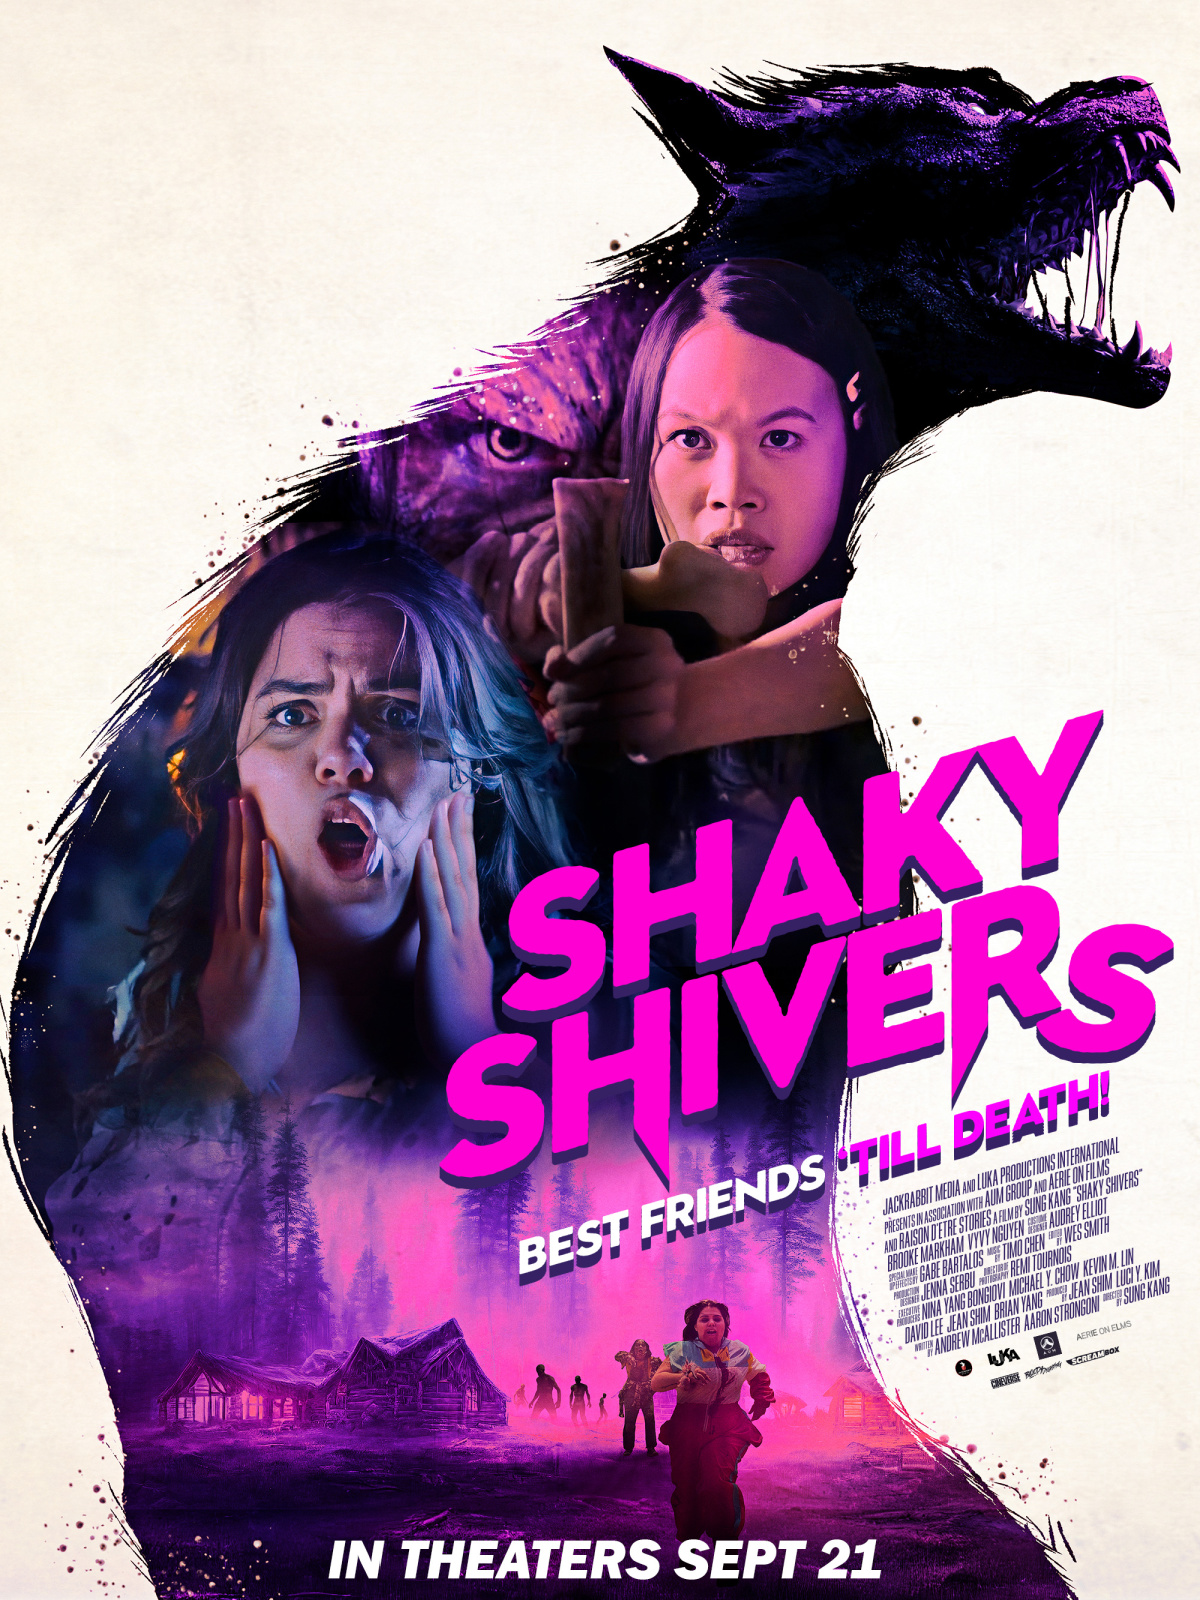 ‘Shaky Shivers’ will play in theaters via Cineverse and Fathom Events for one night only on September 21st.